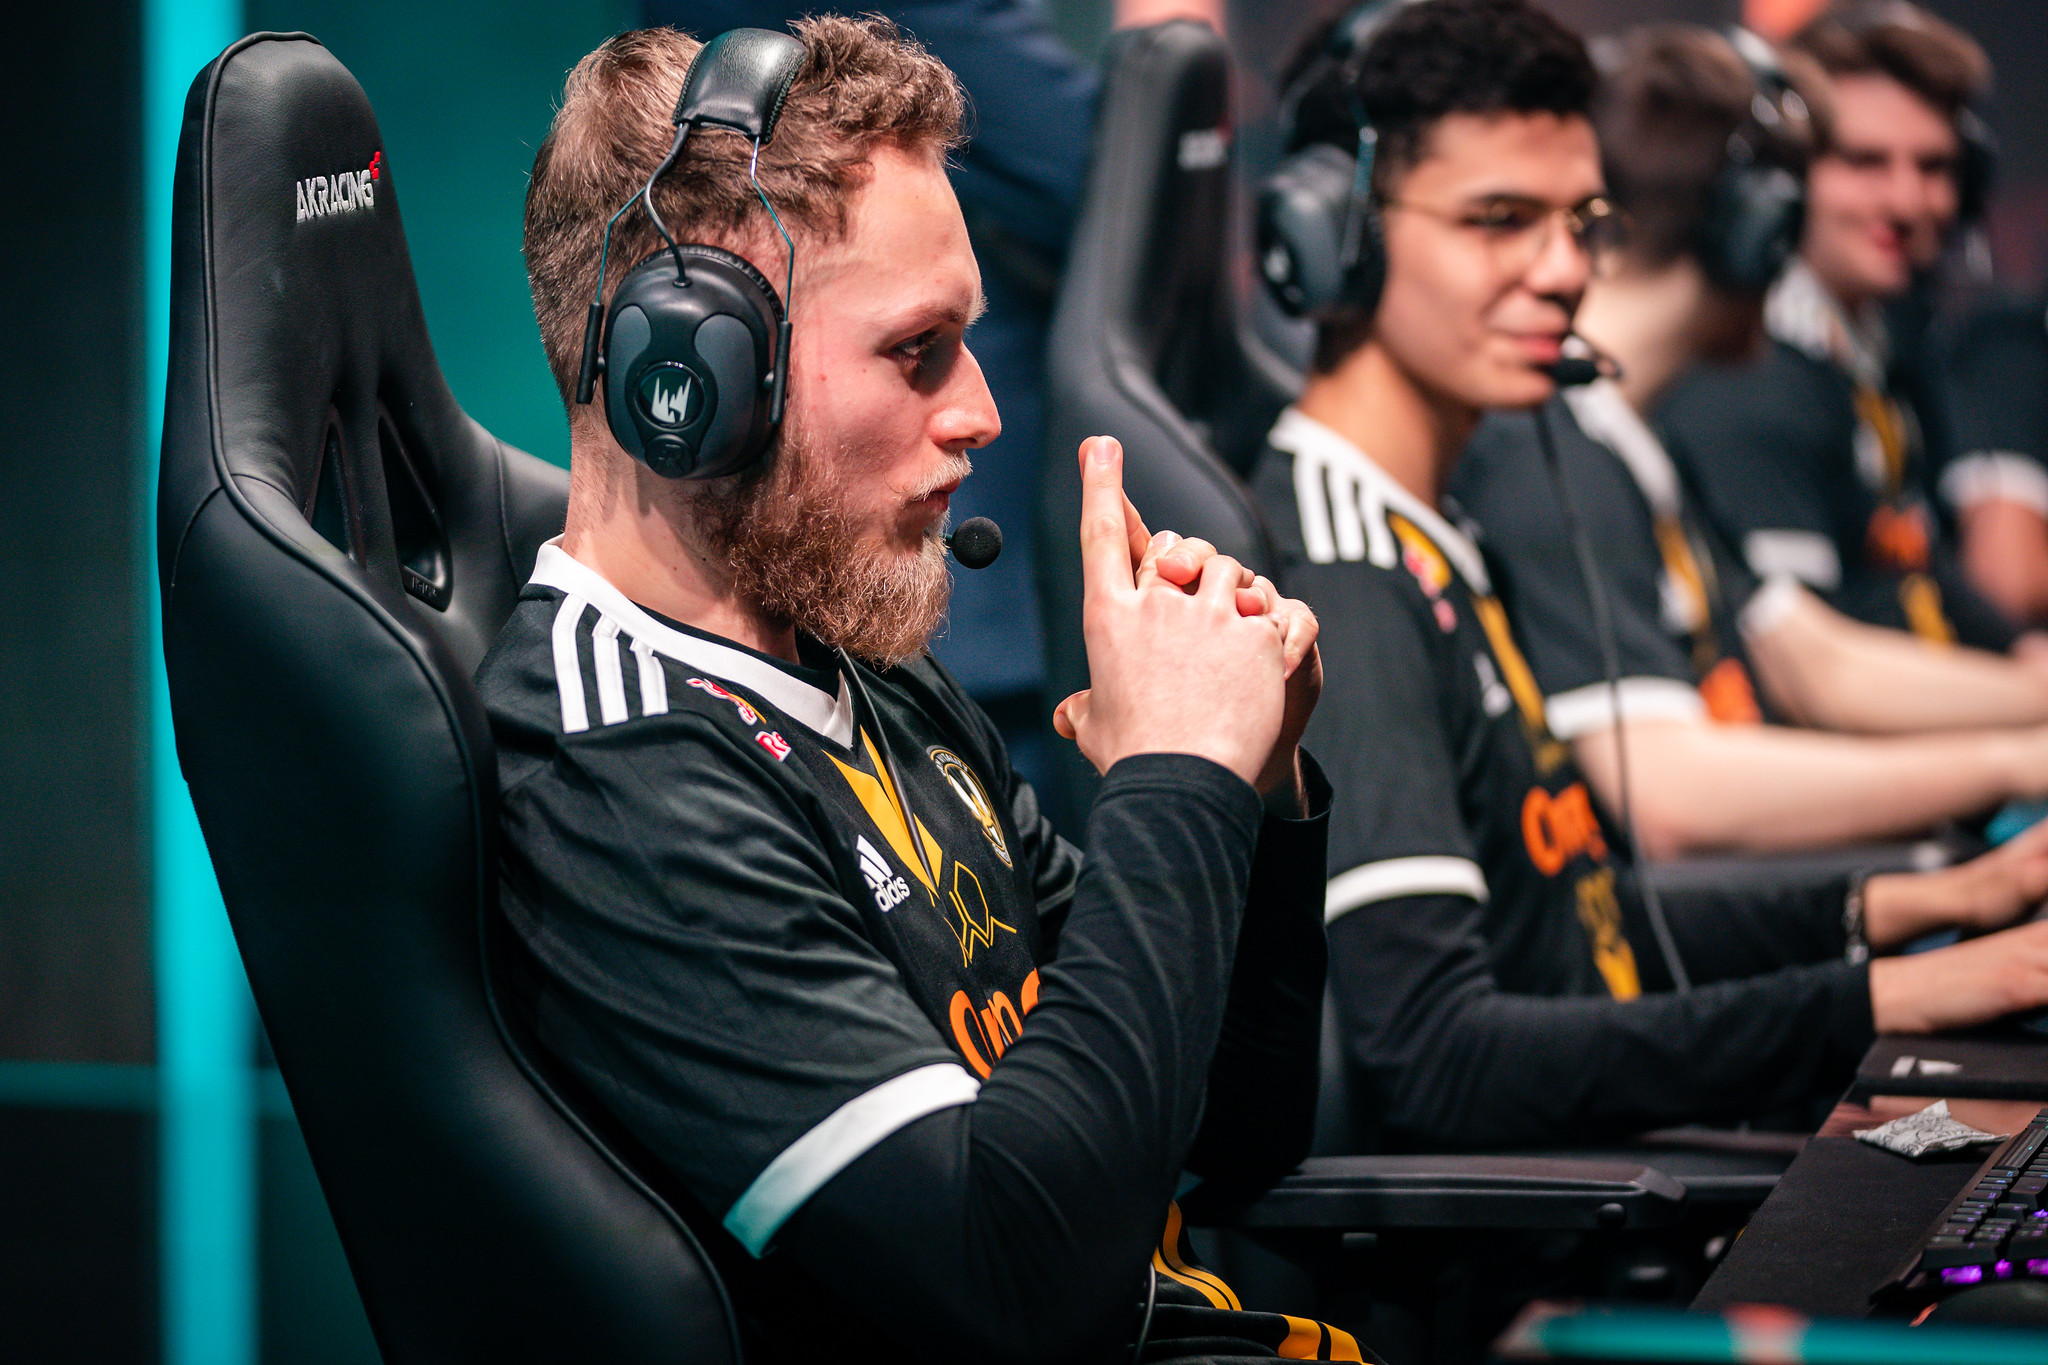 LEC – Vitality’s Top Laner Cabochard Is Looking For Opportunities For Upcoming Spring Split 2021